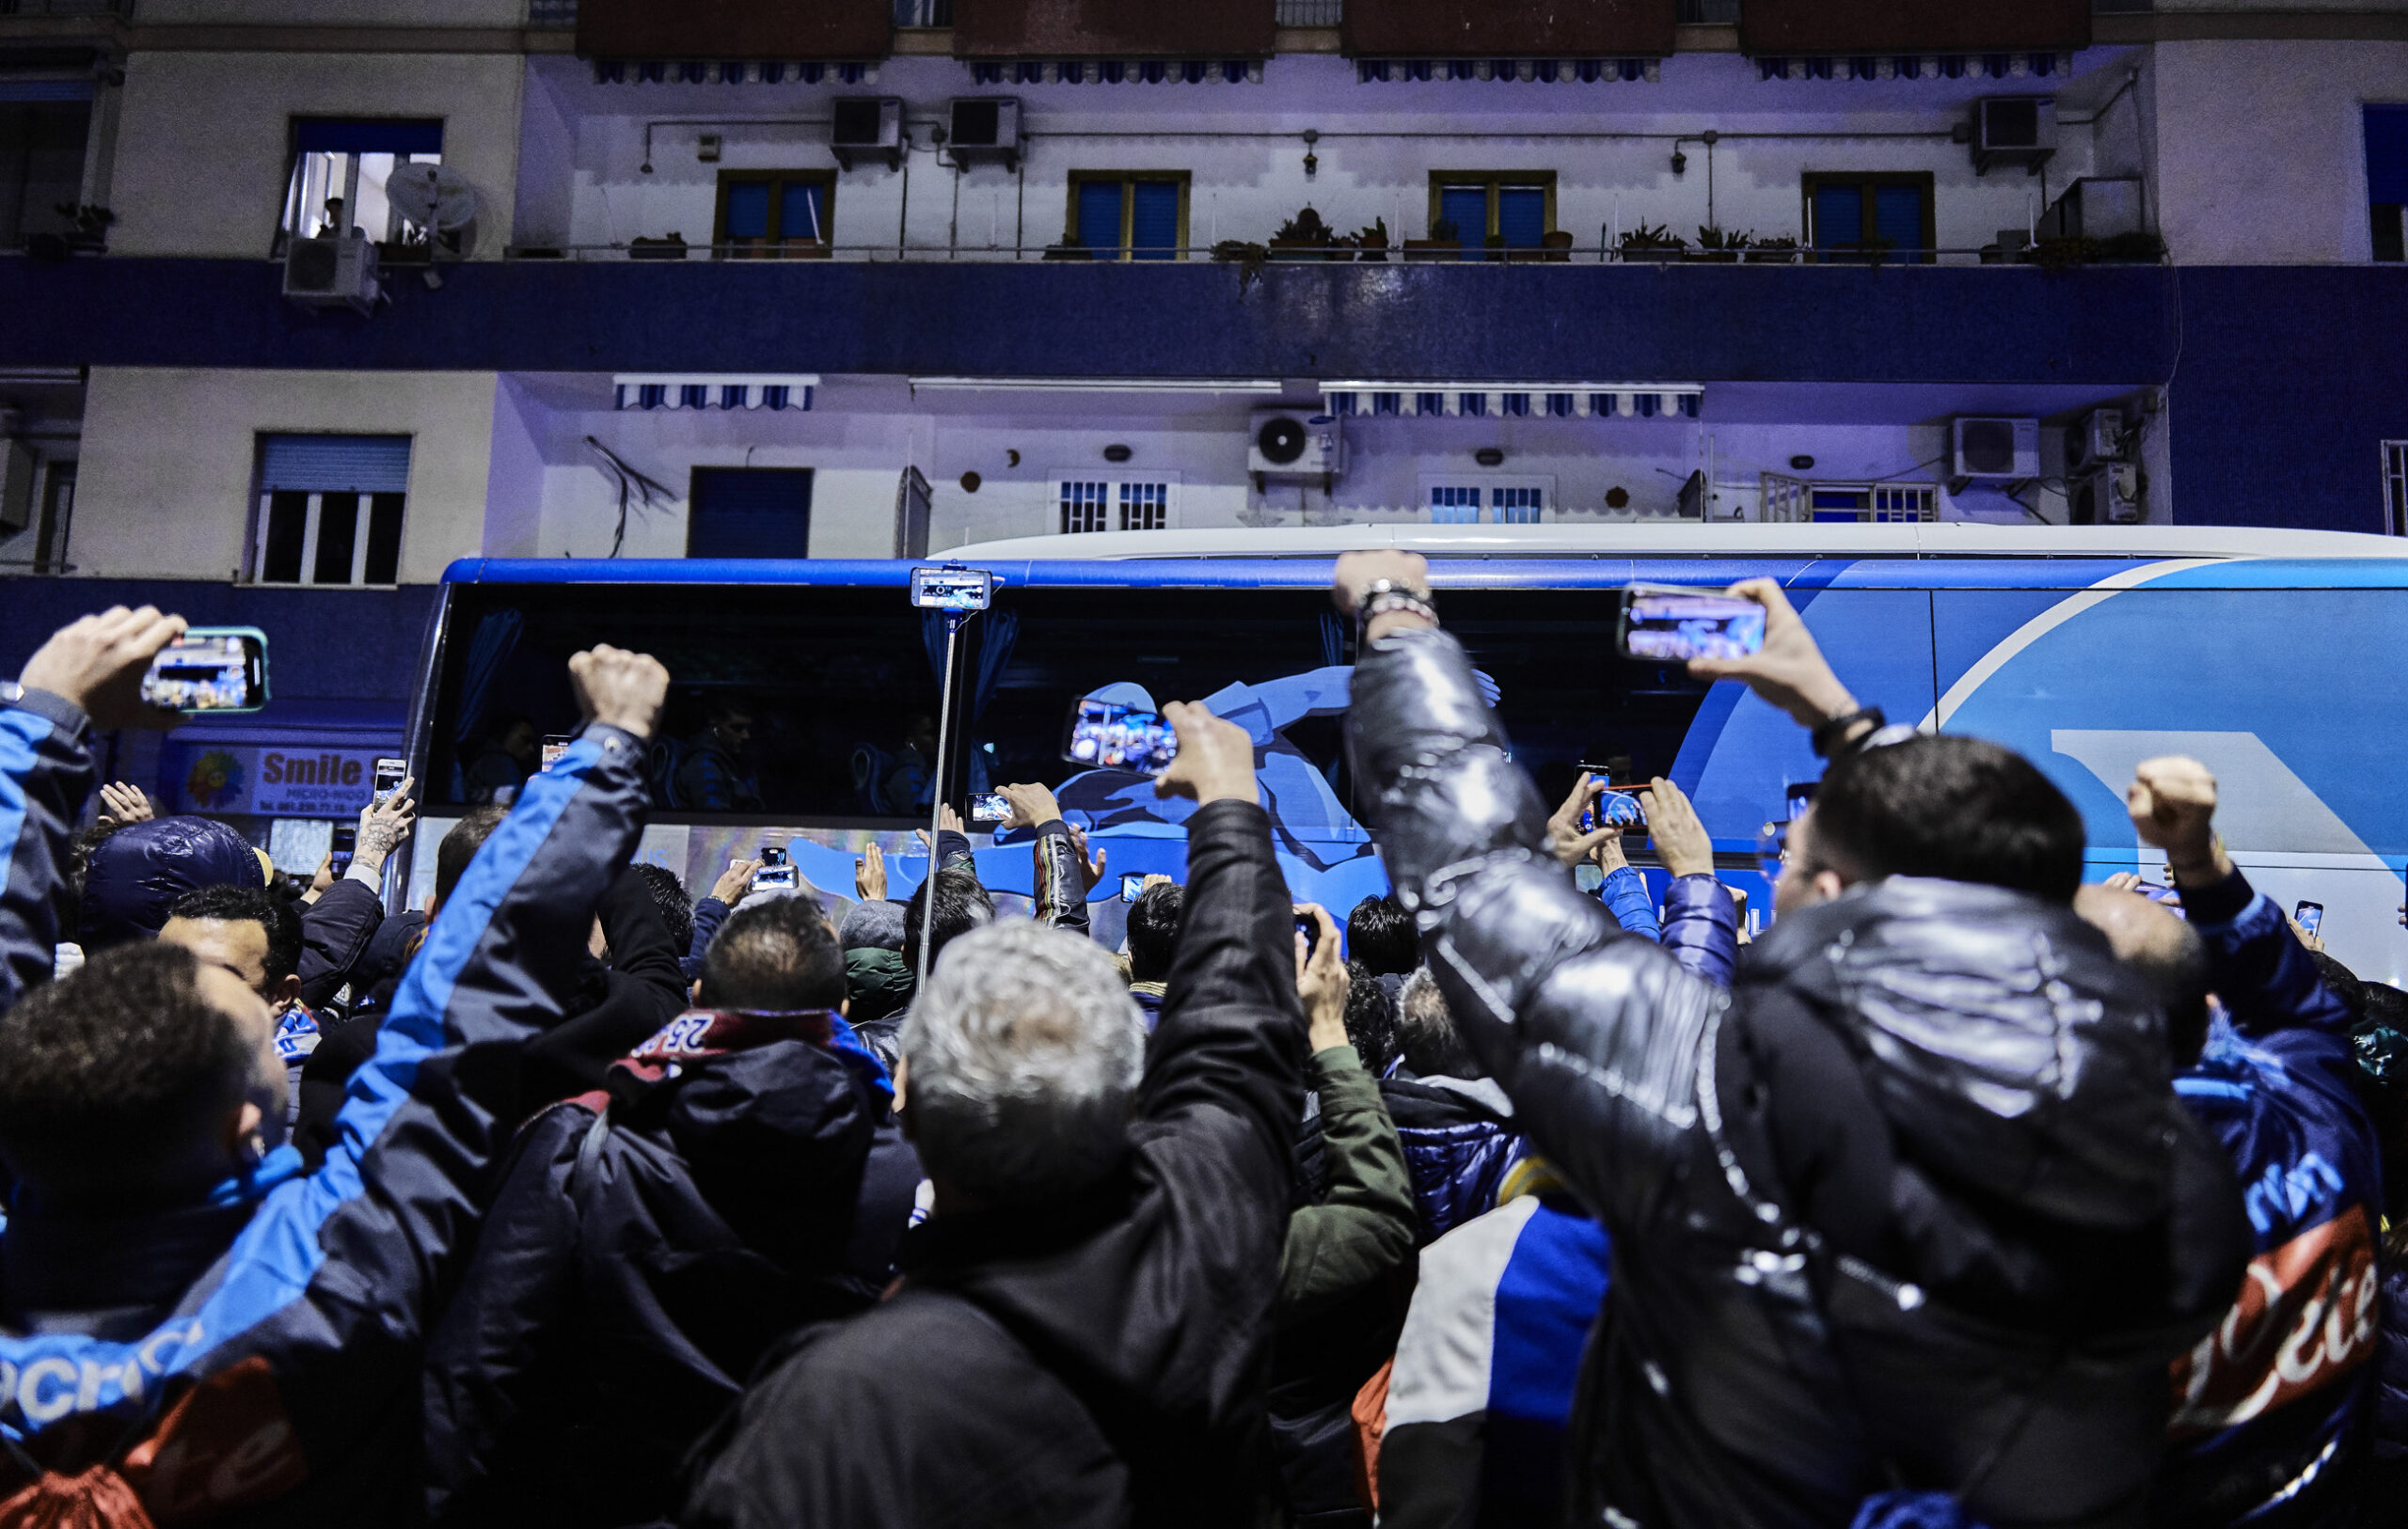 Supporters capturing the arrival at the stadium of Napoli players bus